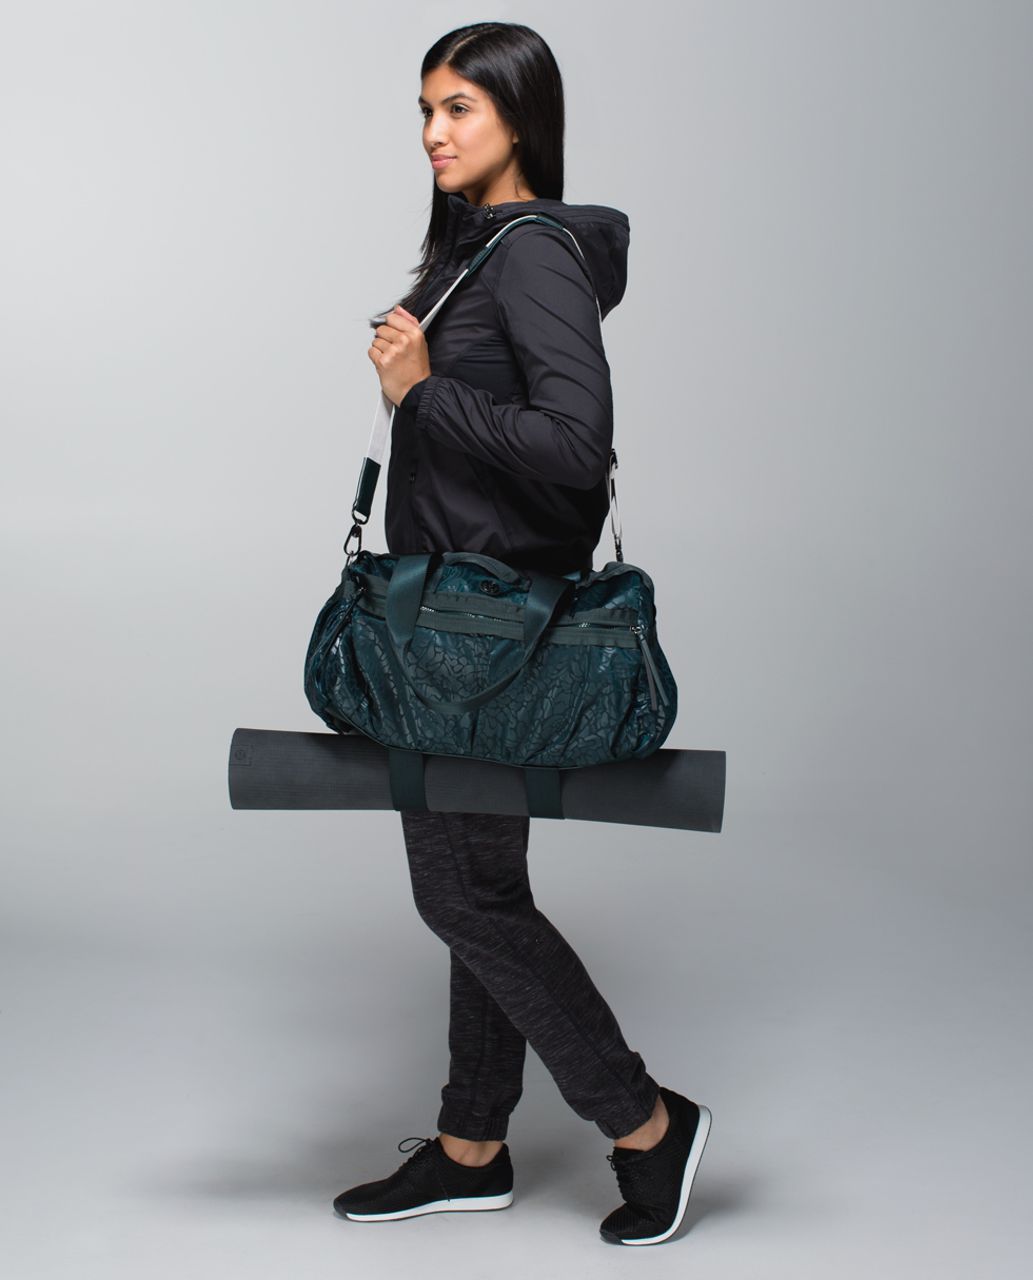 Lululemon Athletica Gym Yoga Bag Review  International Society of  Precision Agriculture